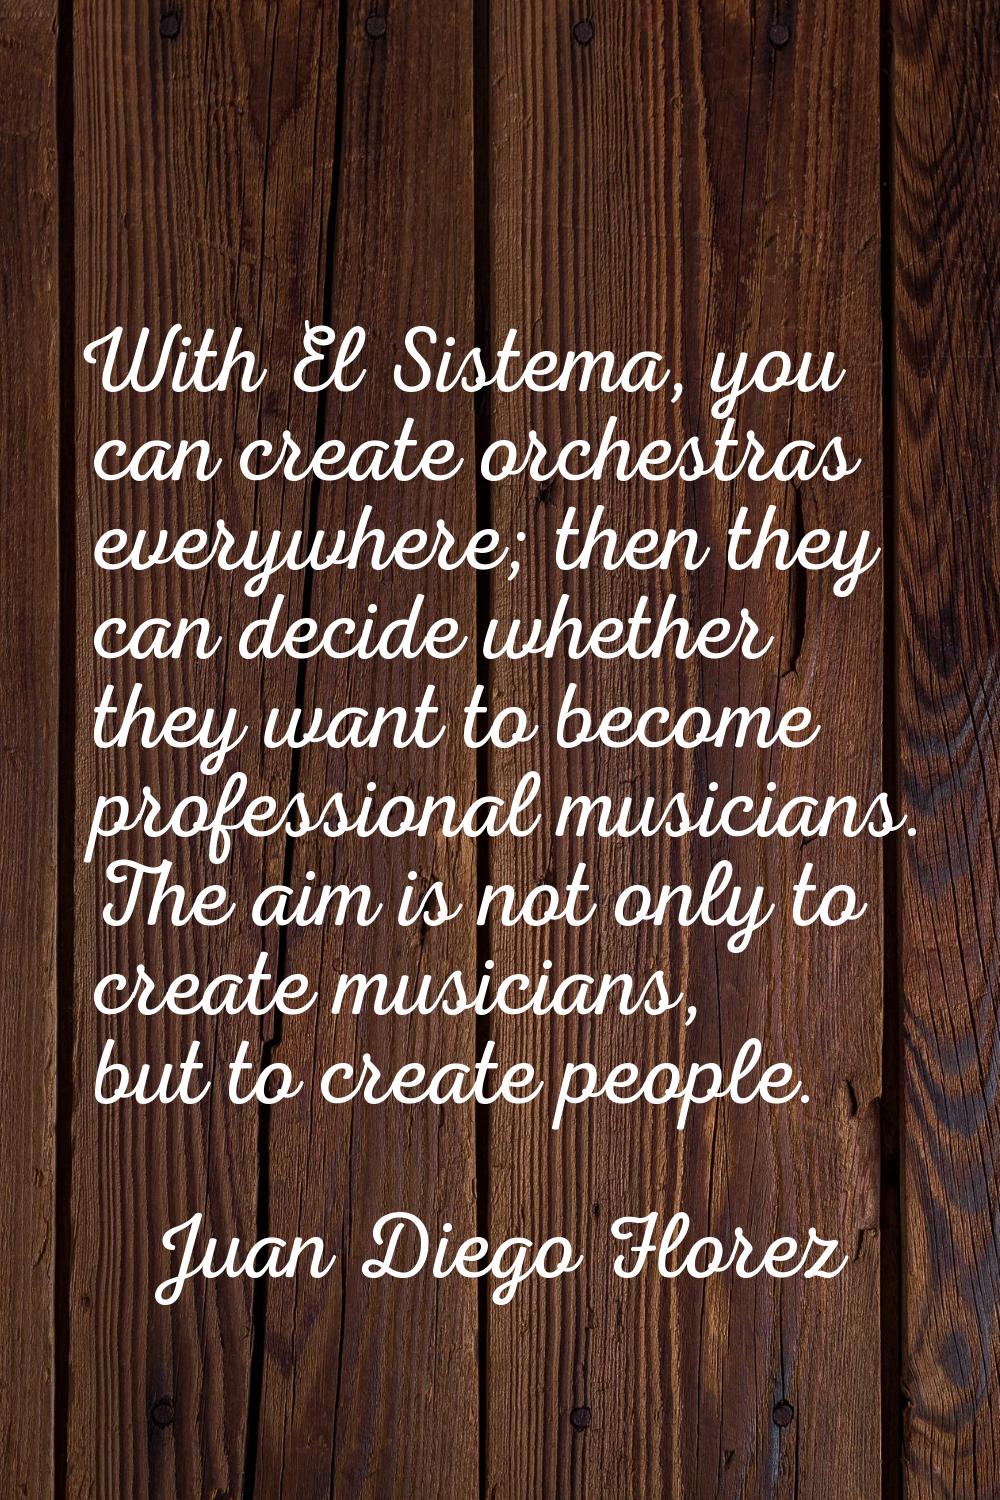 With El Sistema, you can create orchestras everywhere; then they can decide whether they want to be